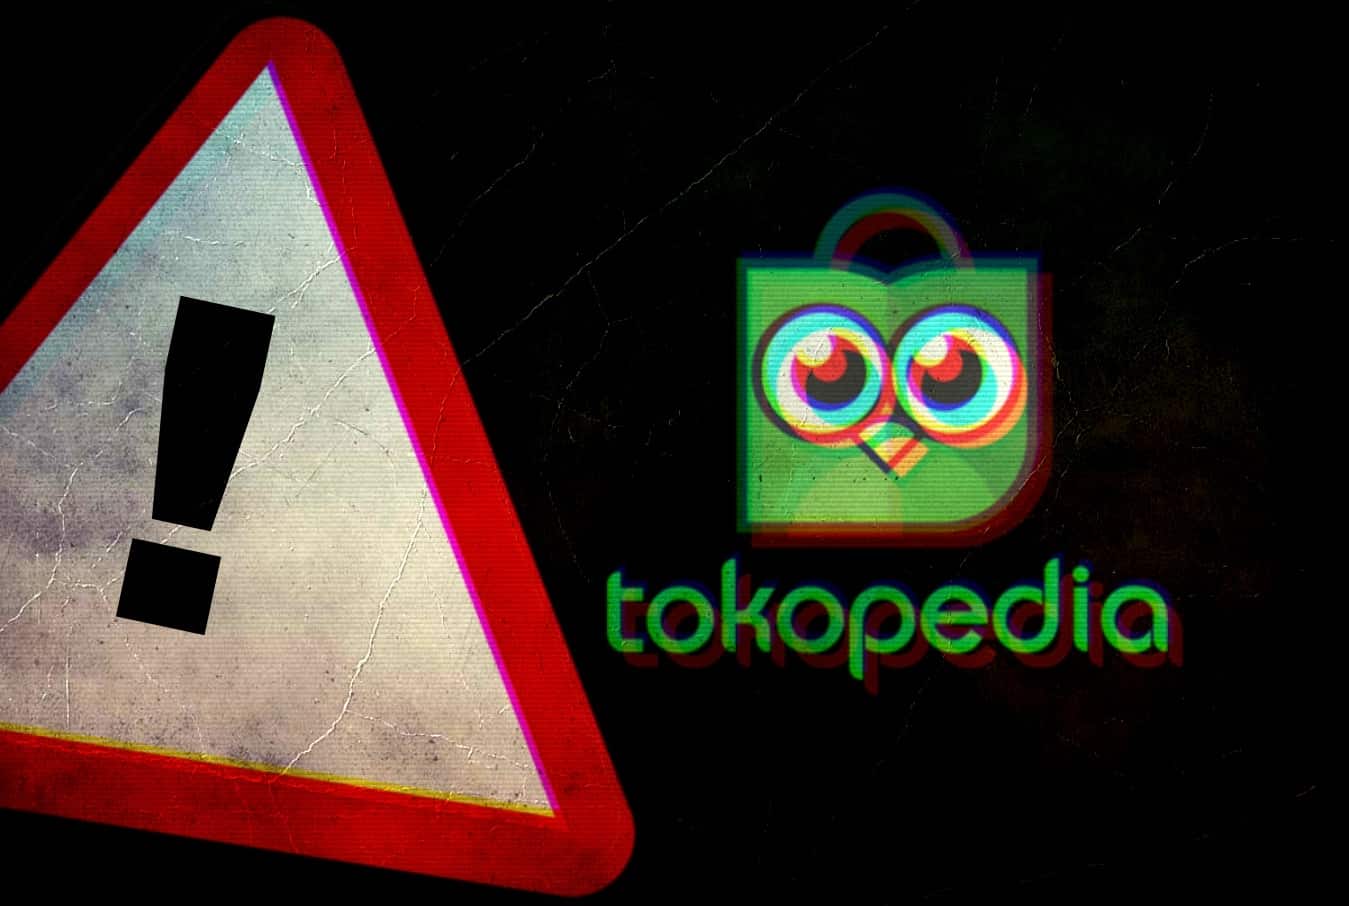 Tokopedia hacked - Login credentials of 91 million users sold online